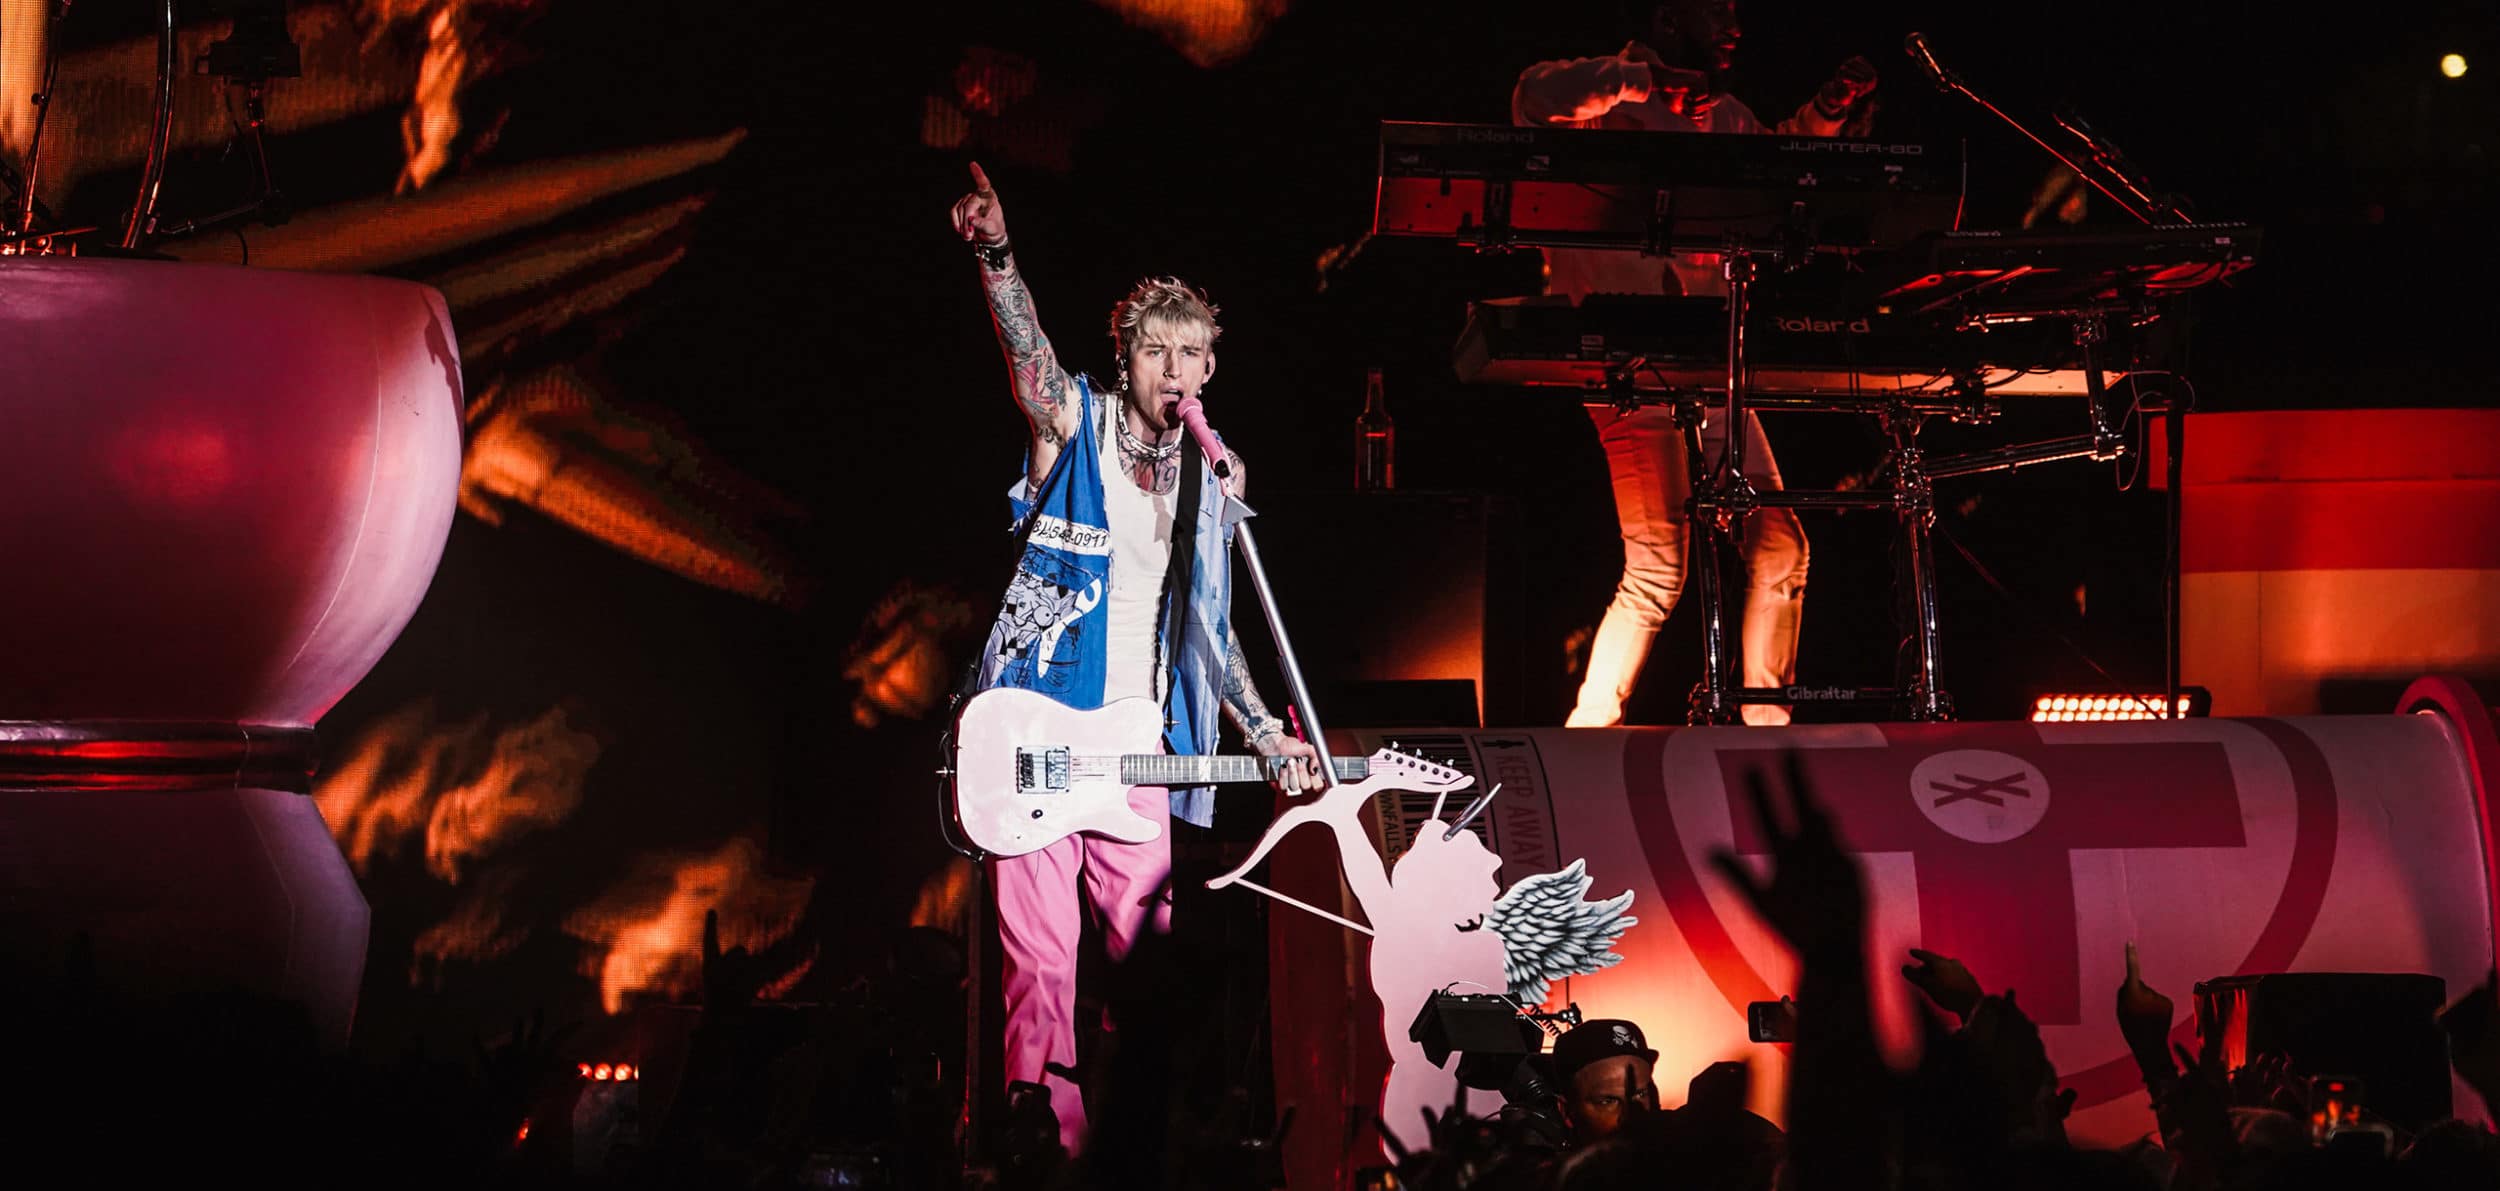 Machine Gun Kelly performing at the Rooftop at Pier 17